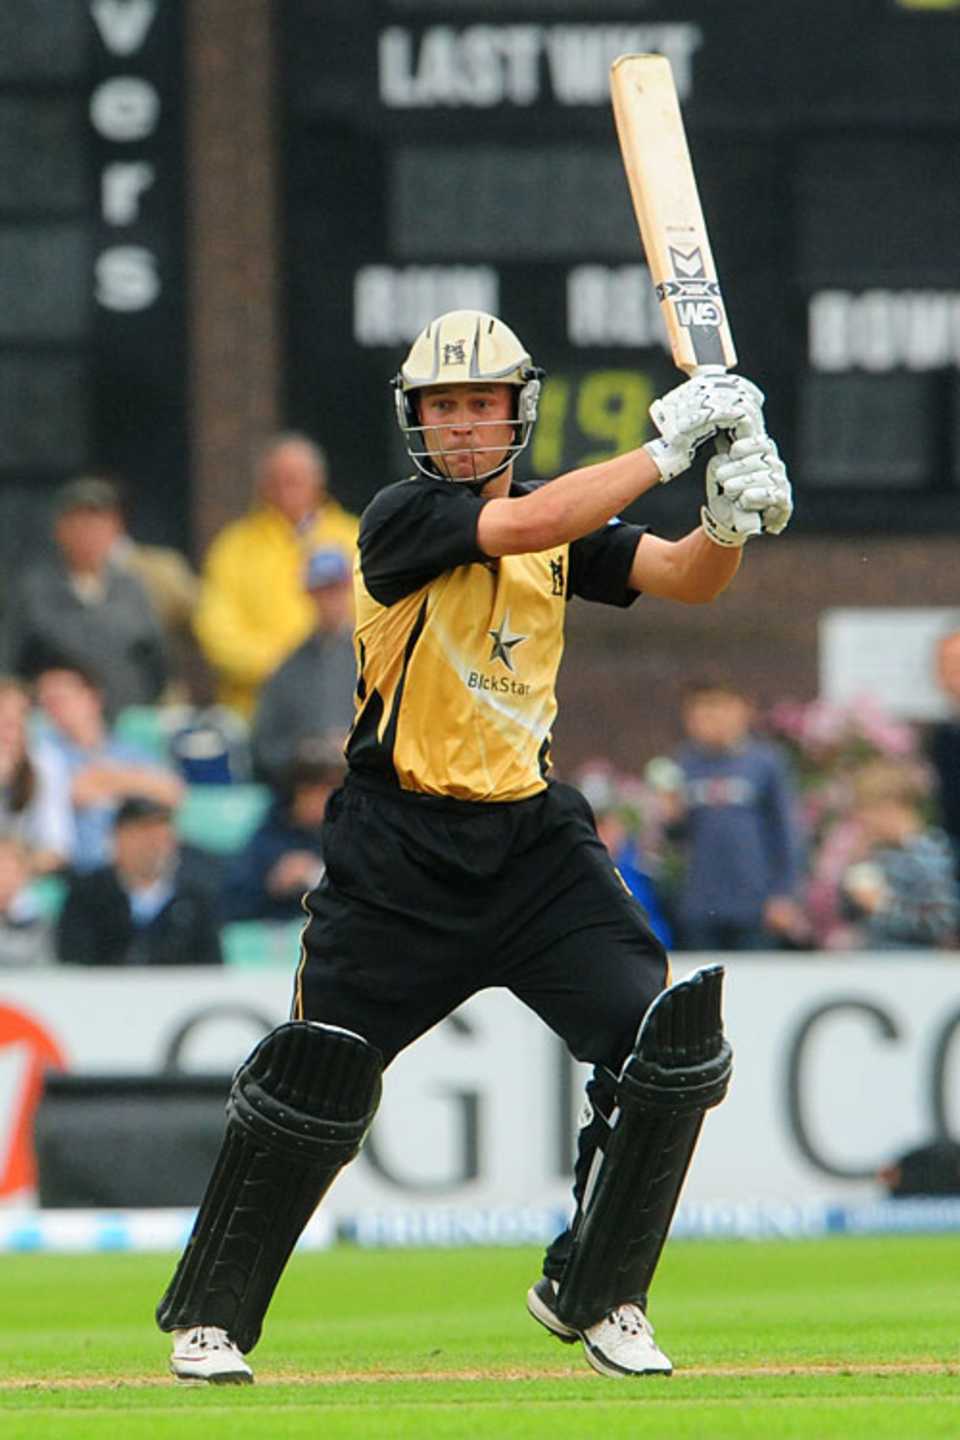 Jonathan Trott made 72 off 54 balls to take Warwickshire to a nine-wicket win, Worcestershire v Warwickshire, Friends Provident t20, New Road, June 18, 2010